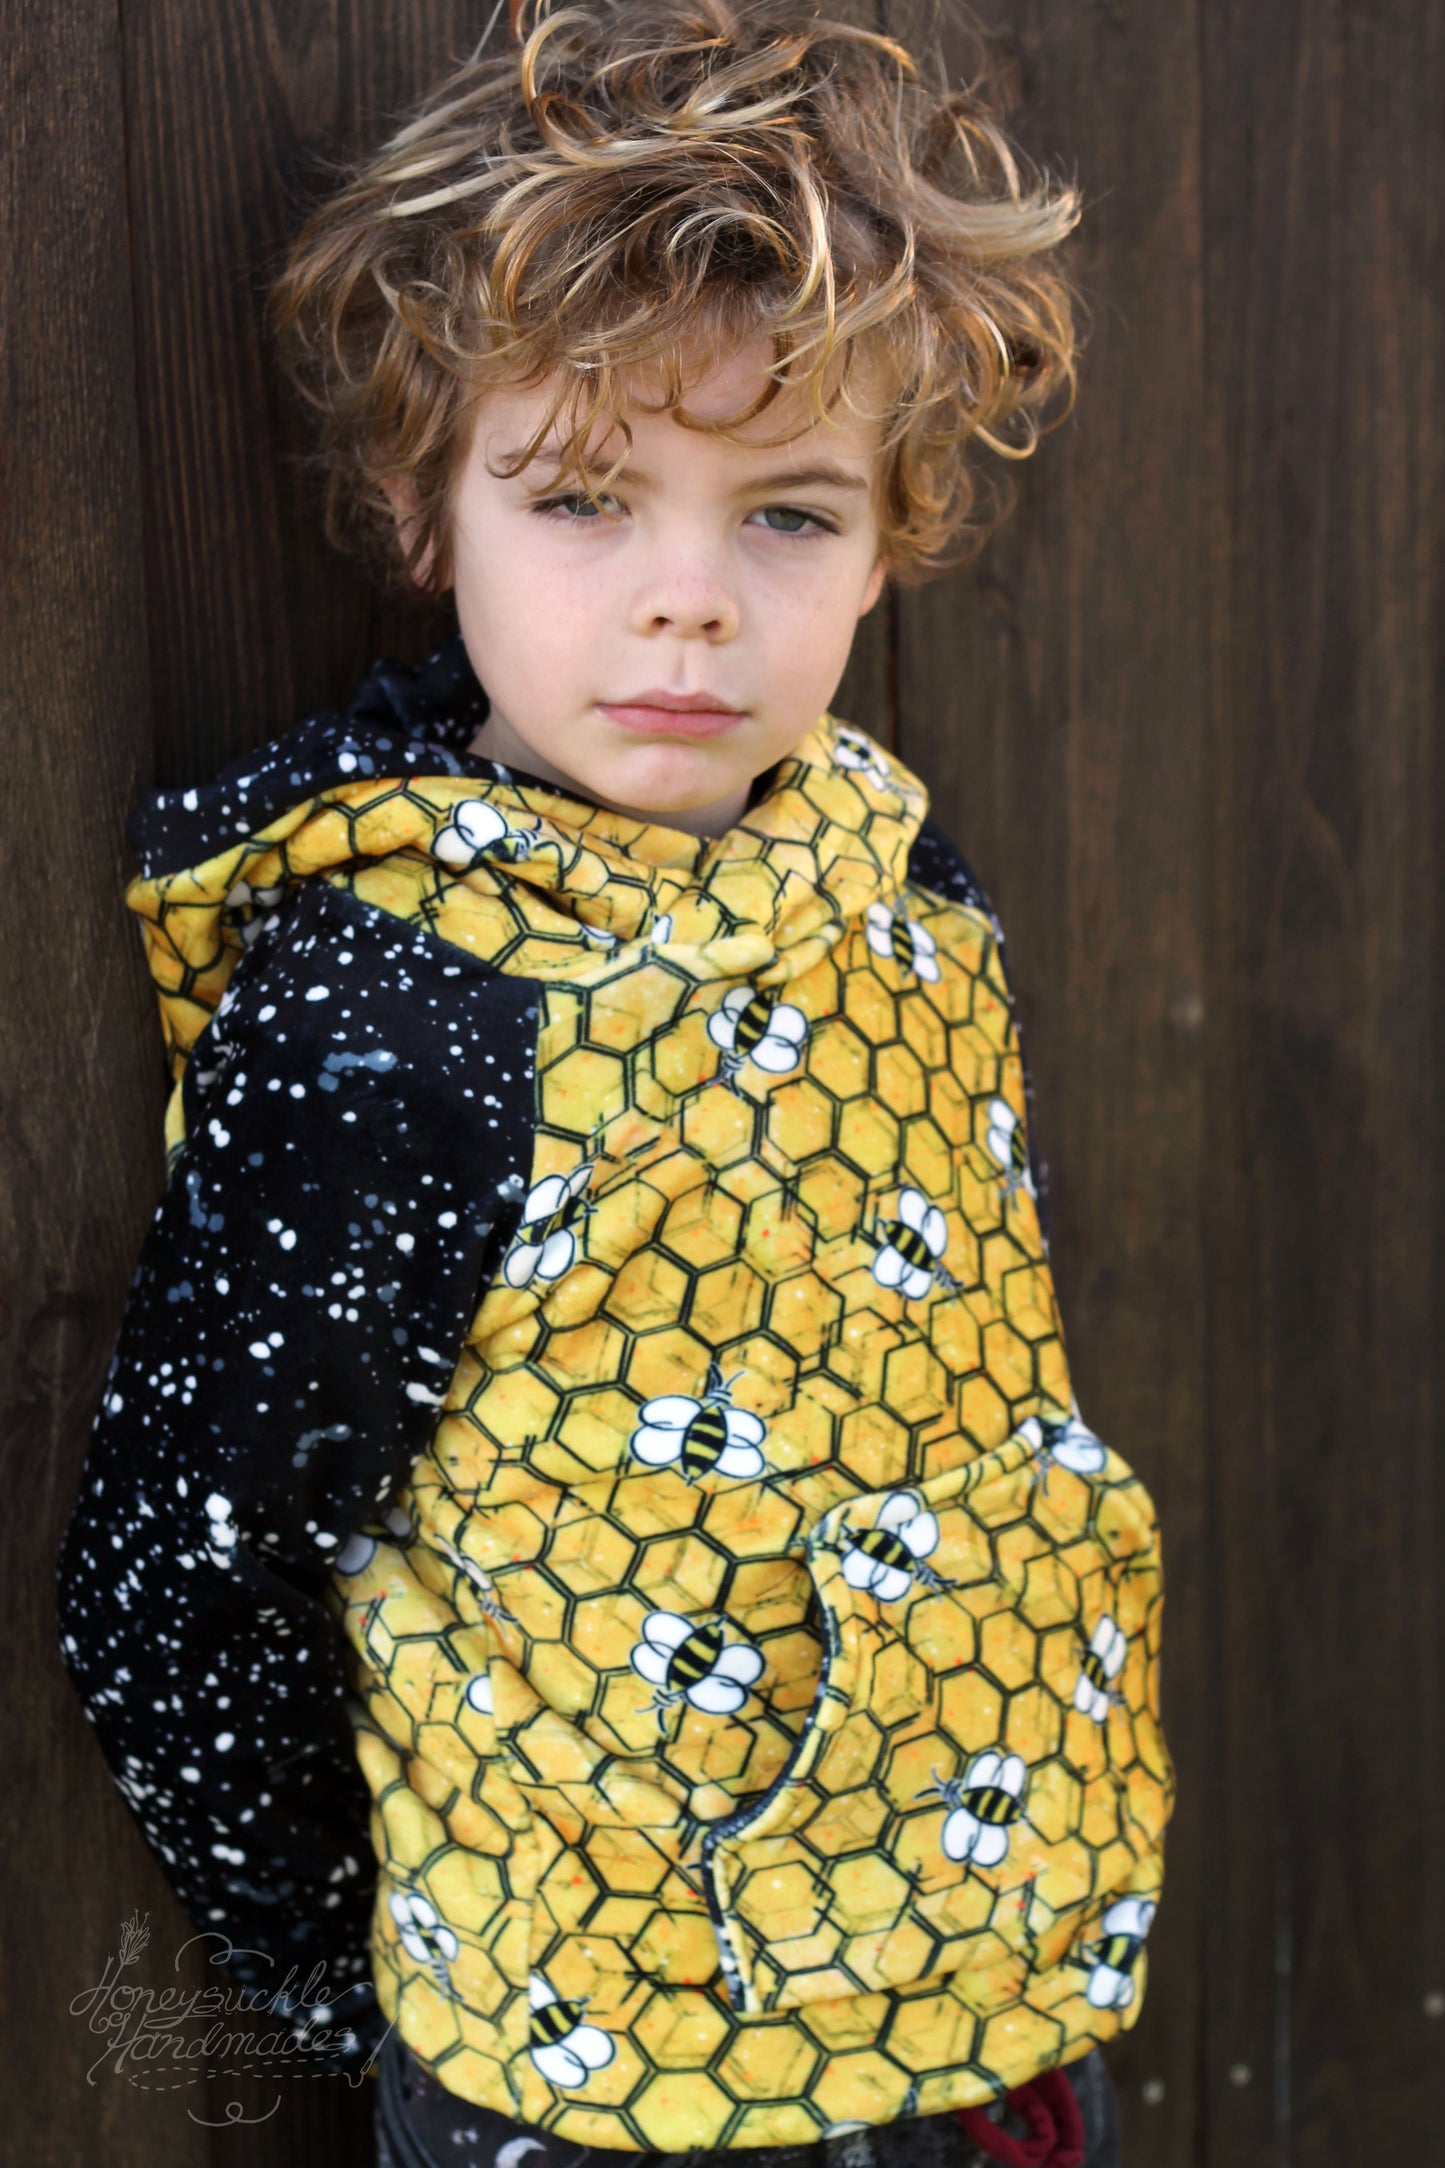 Hedgies, Bees or Succulents kid panels - Cotton Lycra - Round AA Retail Hedgehog and Bees